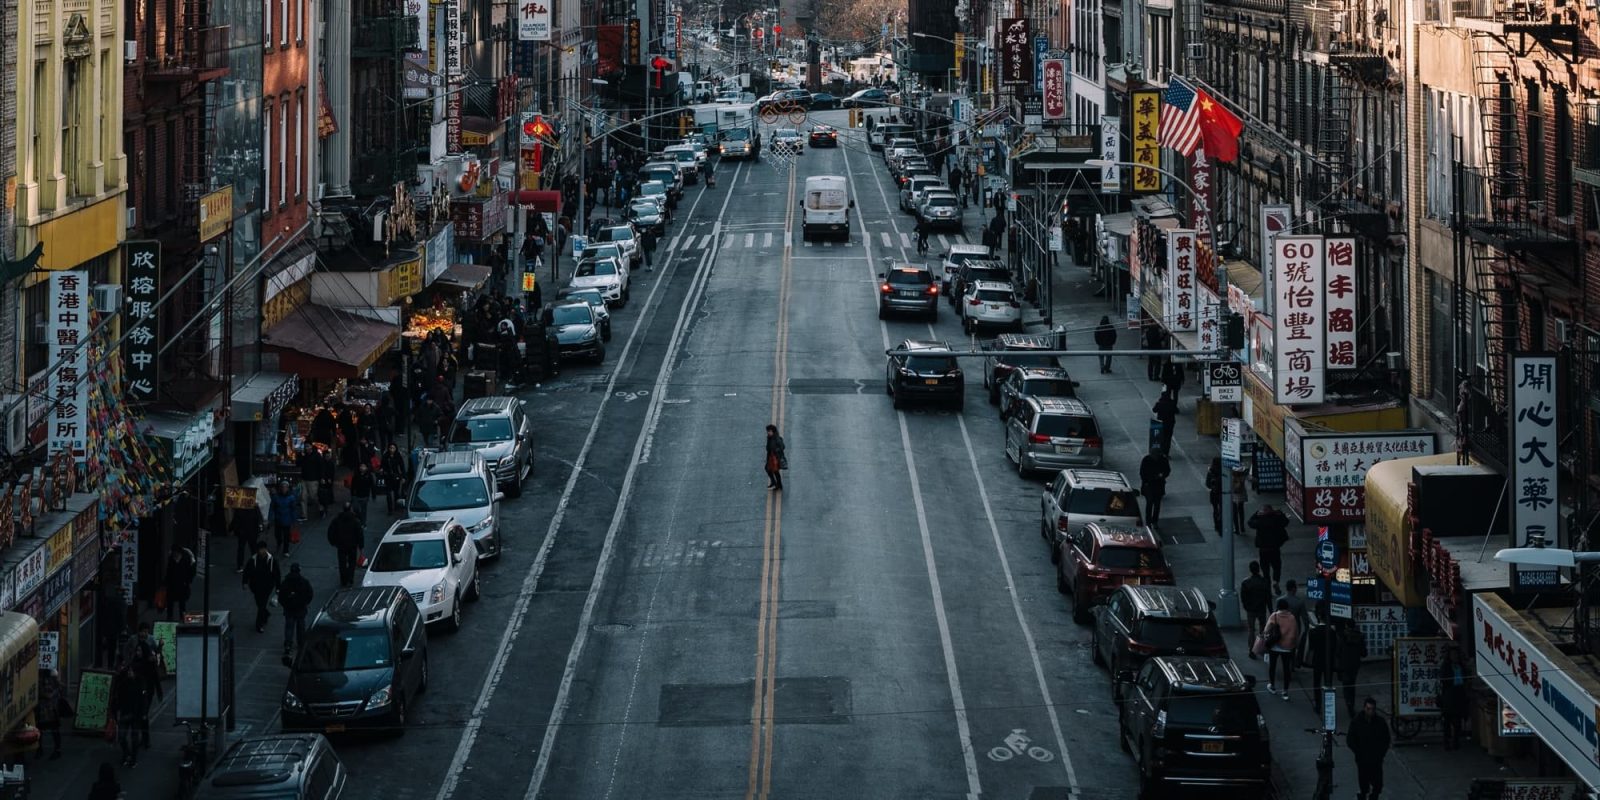 NYC wants to take 25% of streets from cars, give to pedestrians & bikes